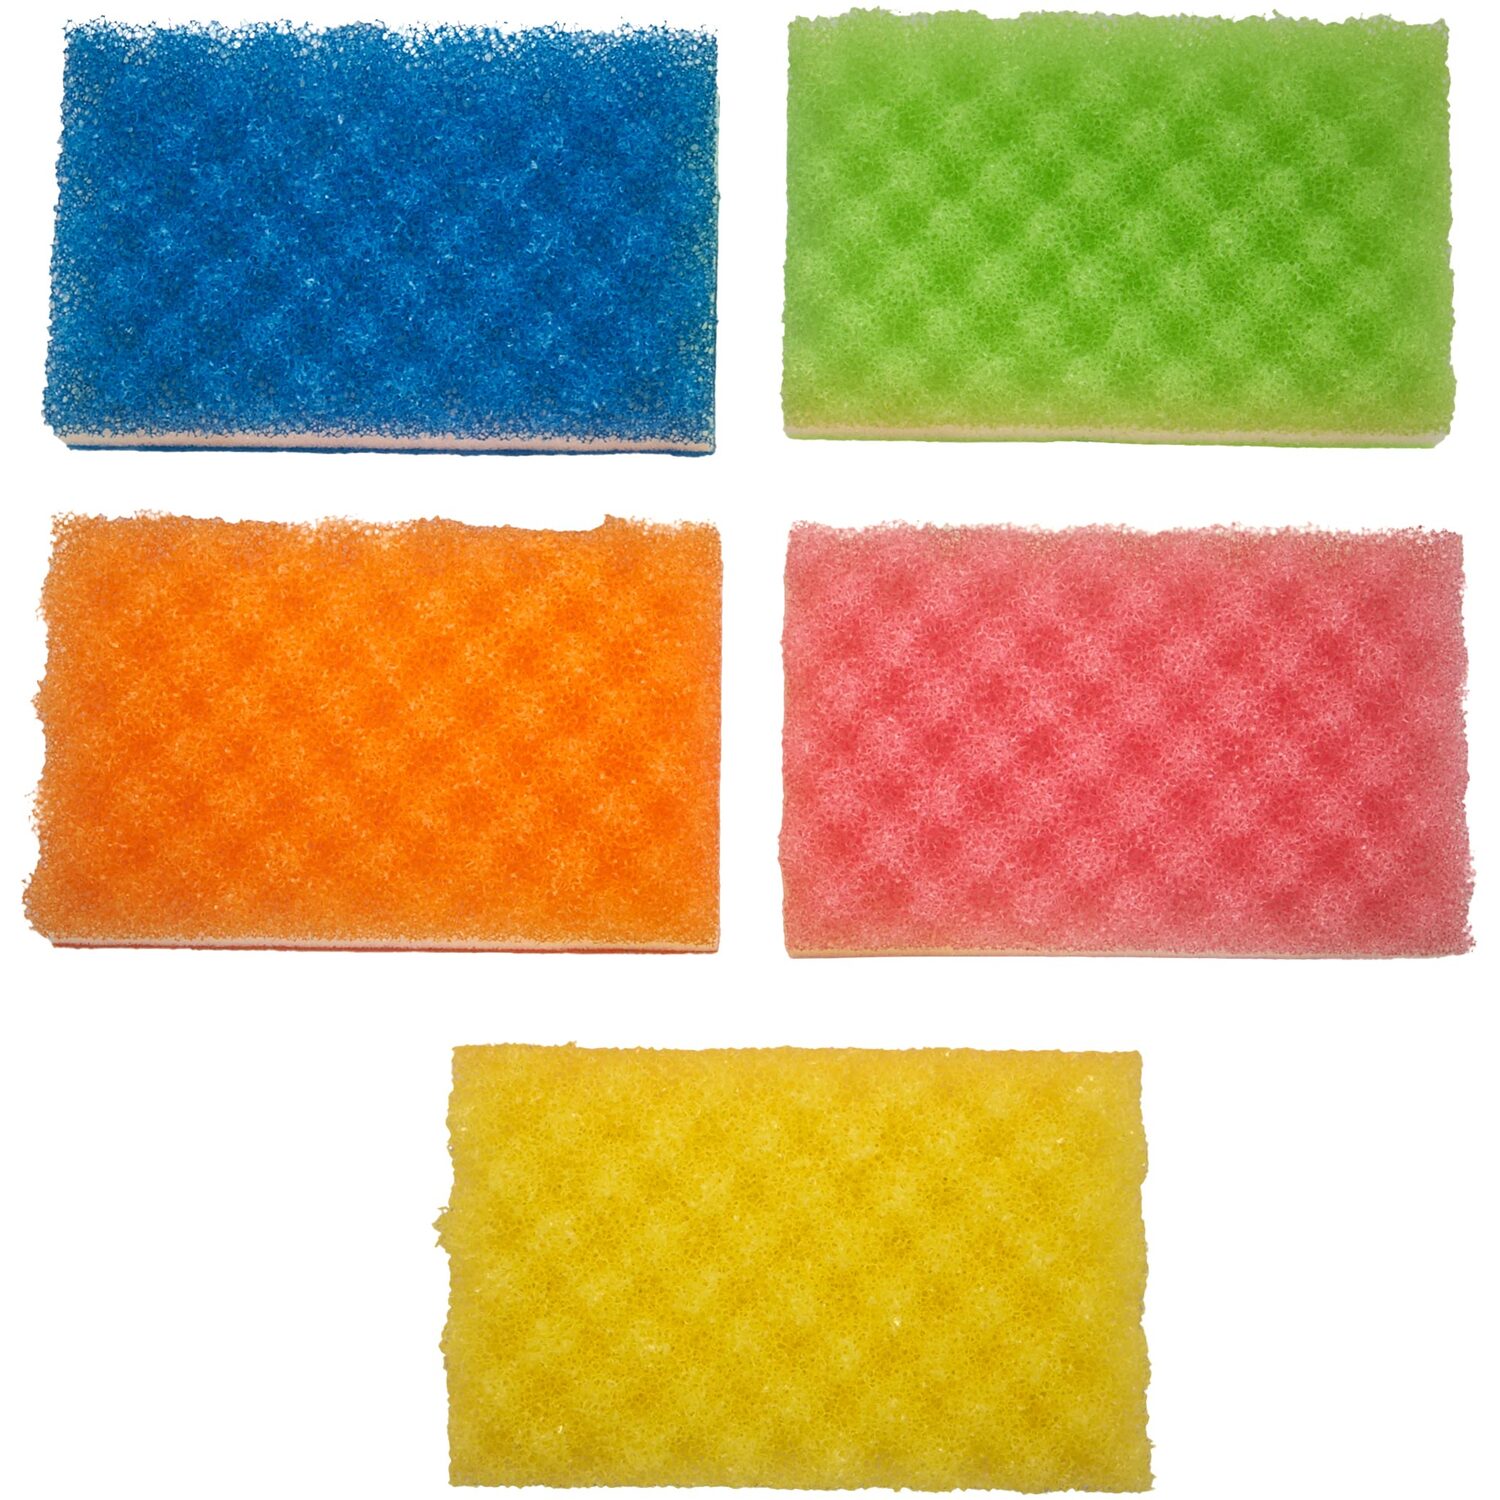 My Home 3 Layer Sponges 5 Pack Image 3